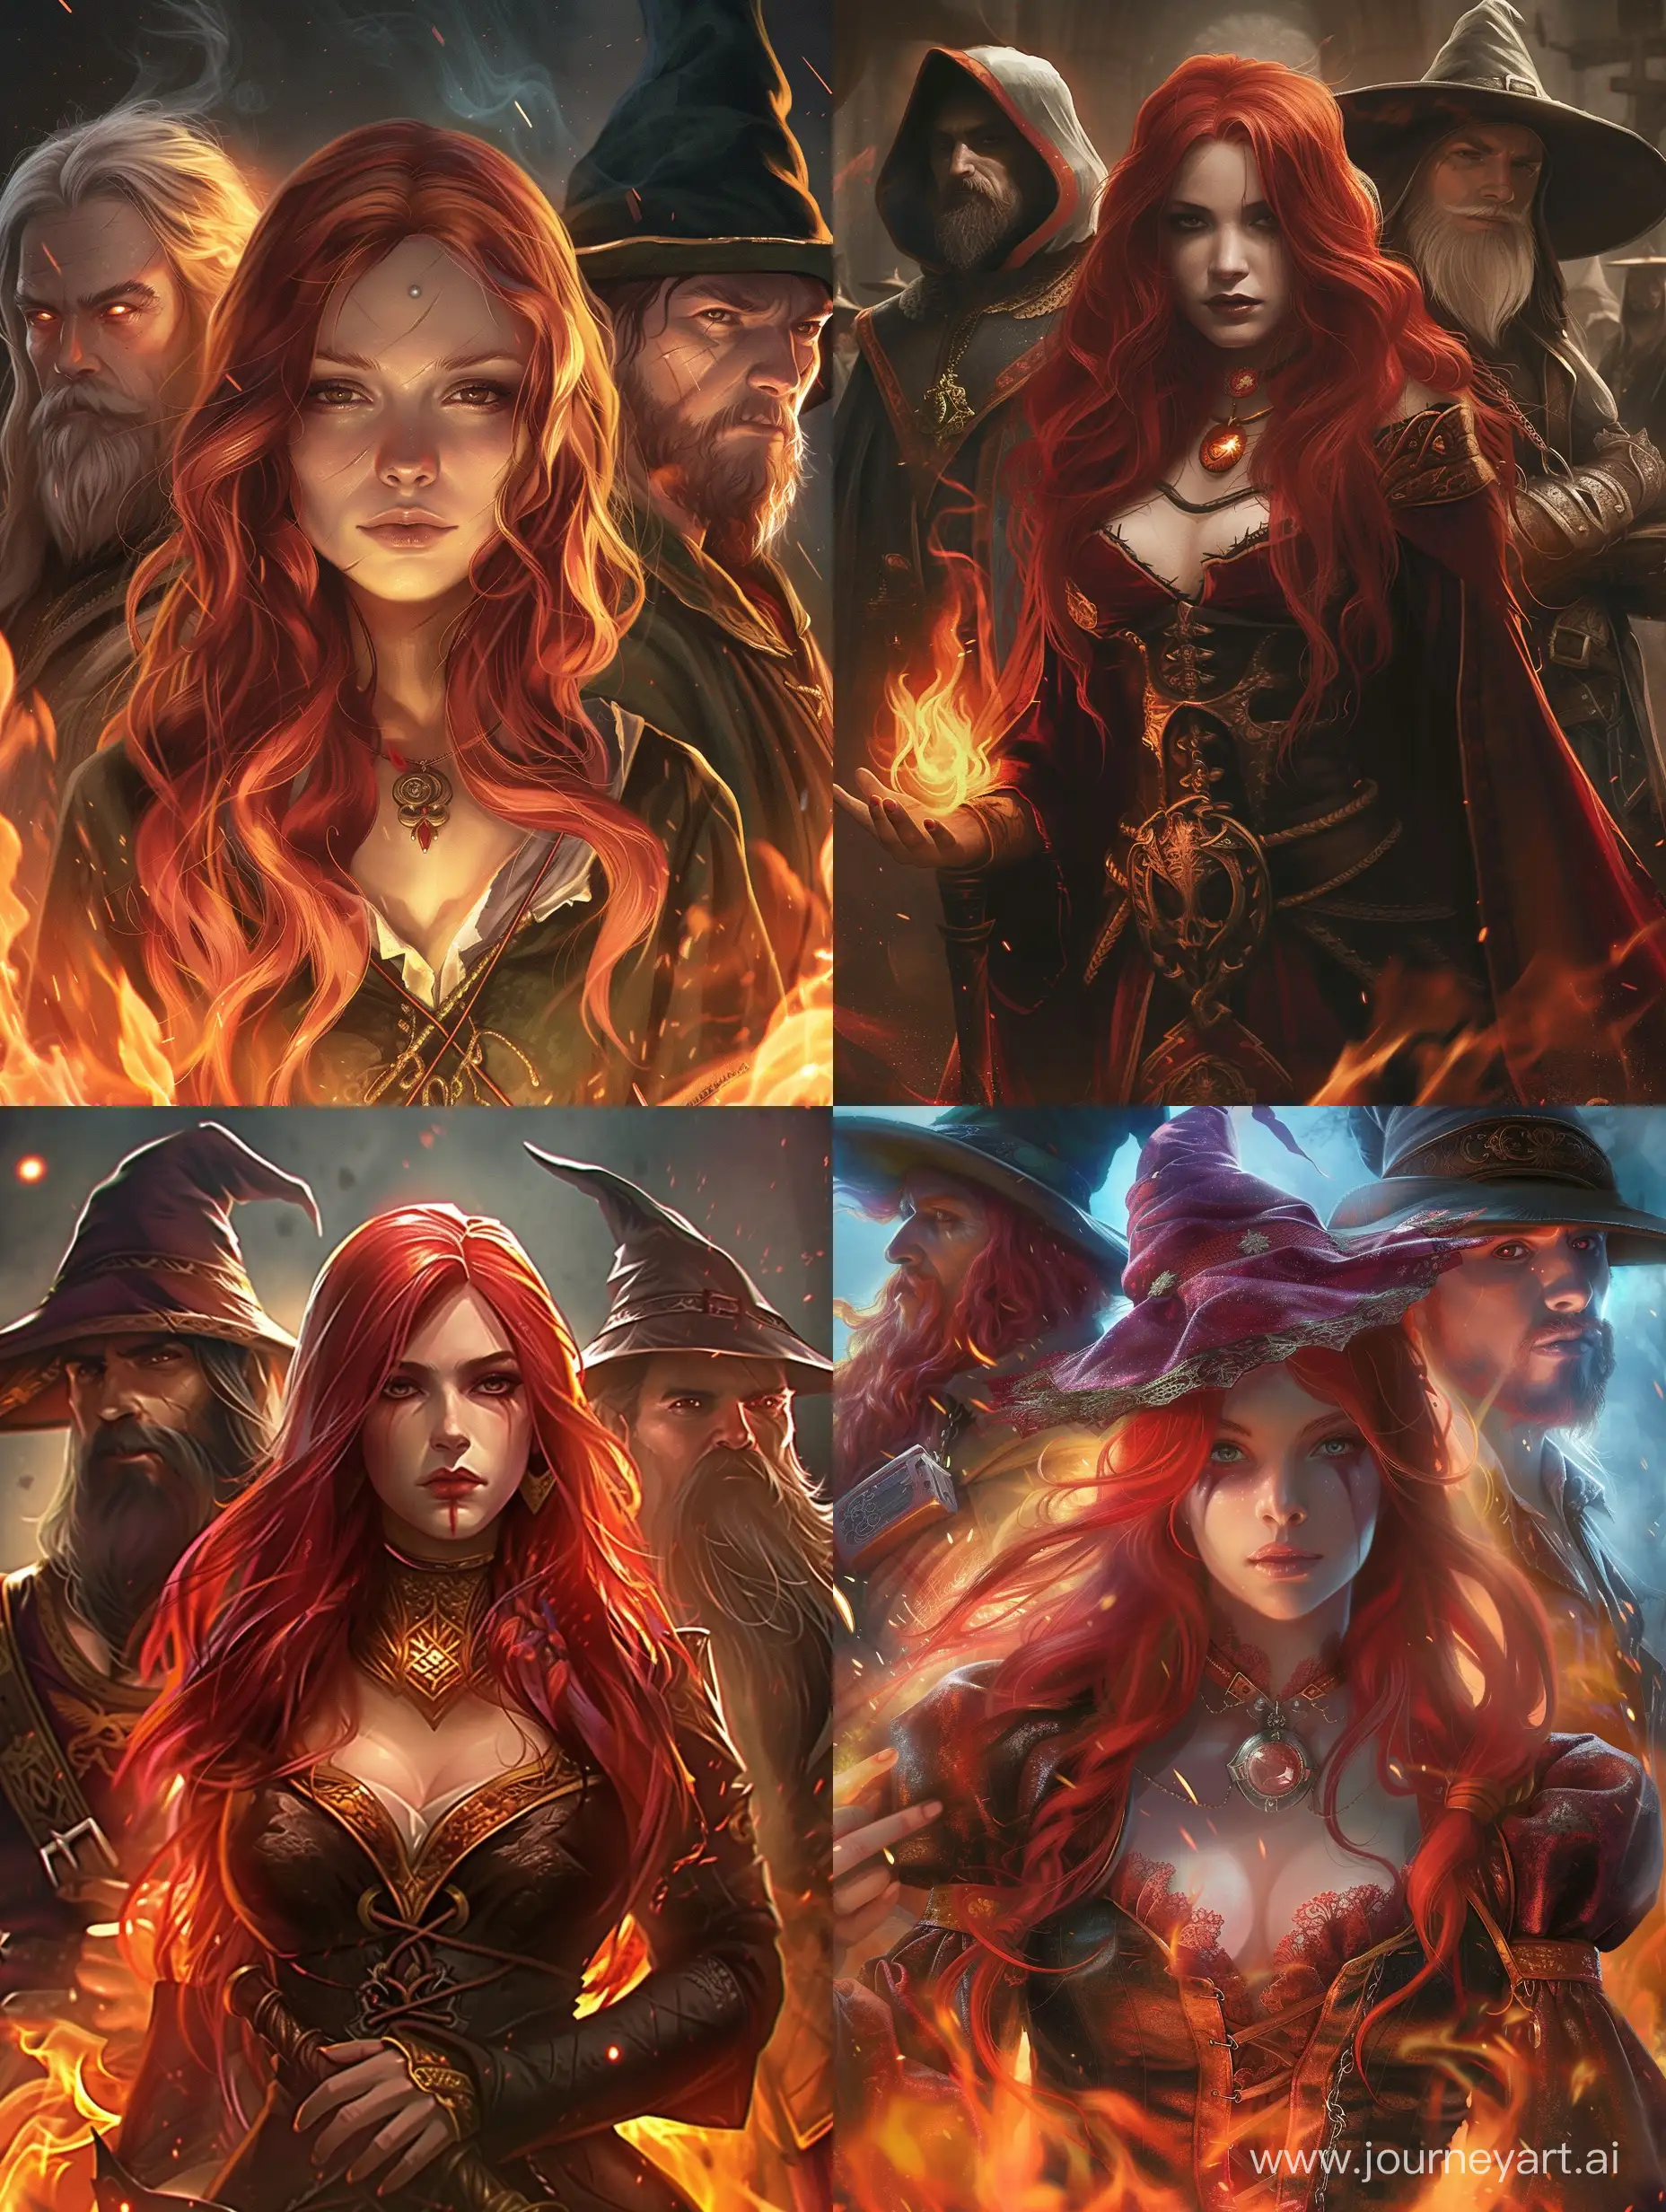 Fiery-Passion-Fantasy-Romance-with-RedHaired-Girl-and-Two-Male-Wizards